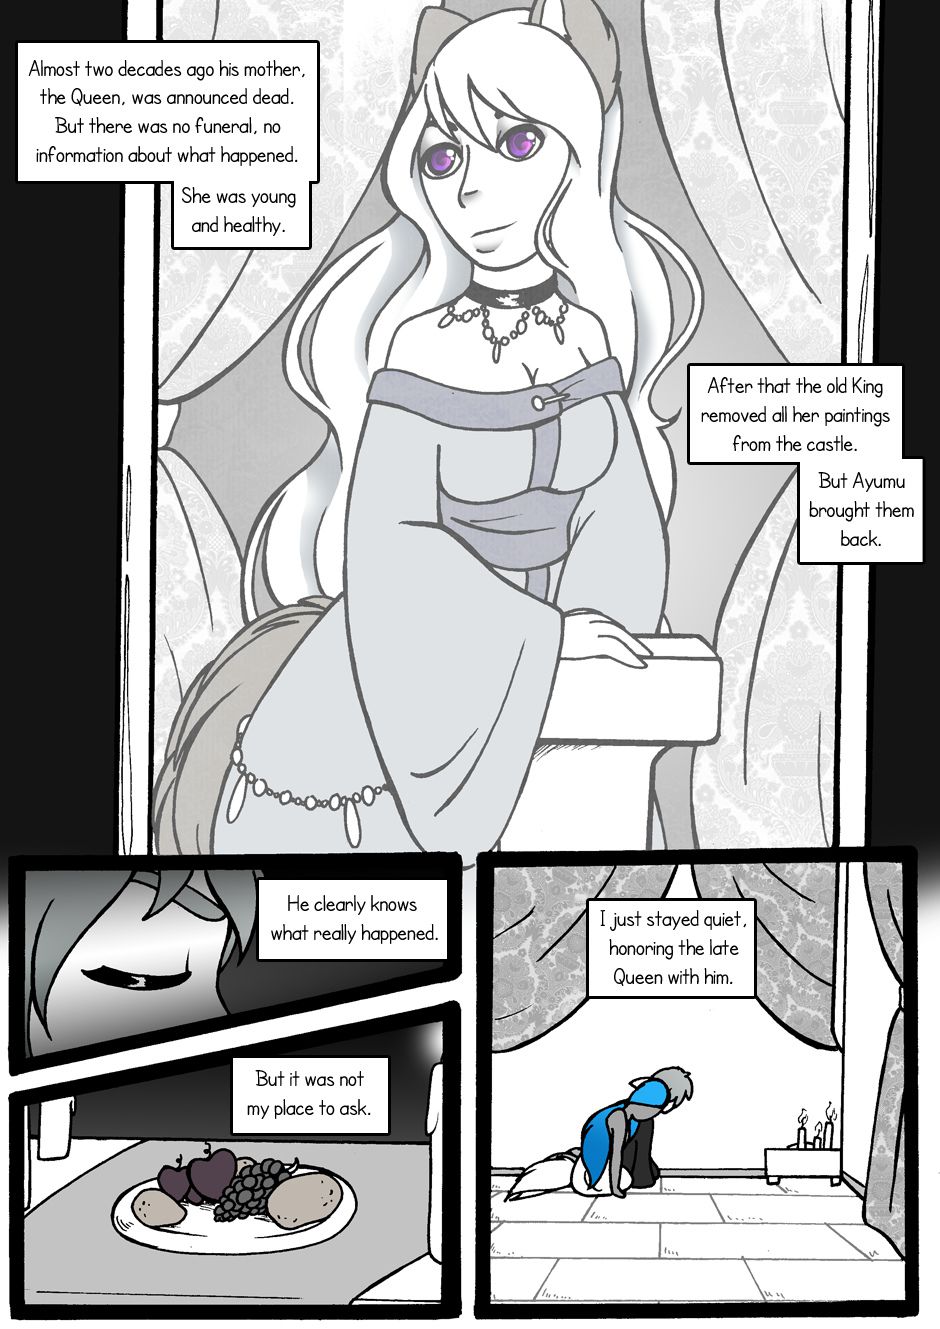 [Jeny-jen94] Between Kings and Queens [Ongoing] 117